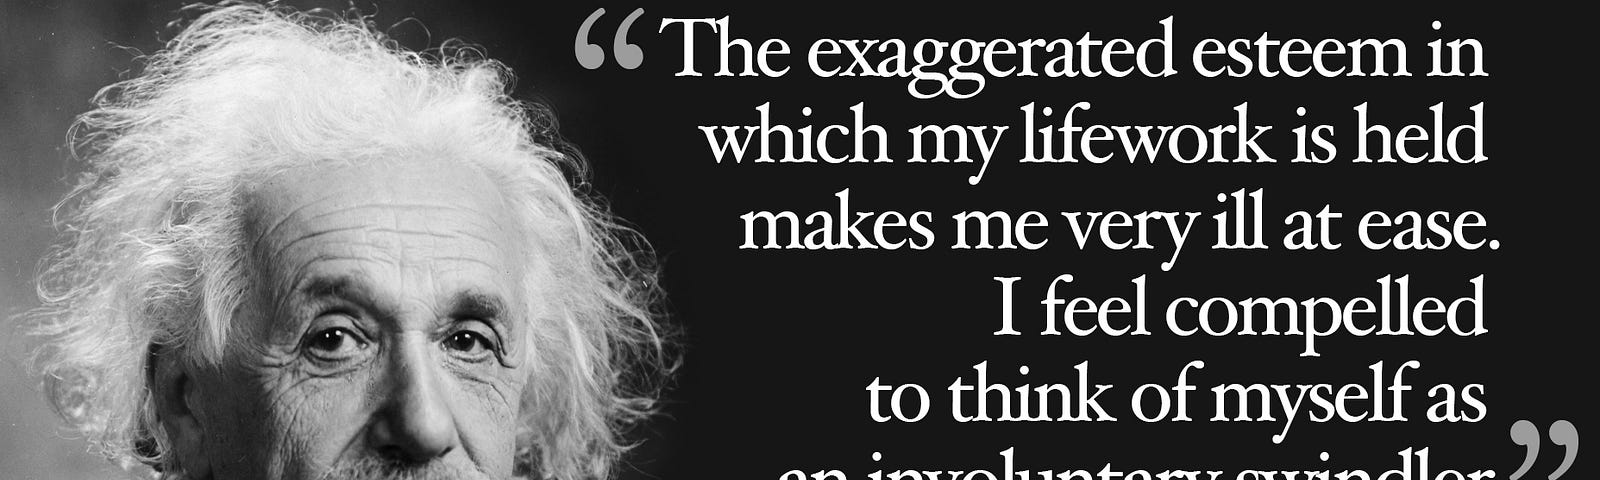 Albert Einstein on the imposter syndrome and feeling like a fake